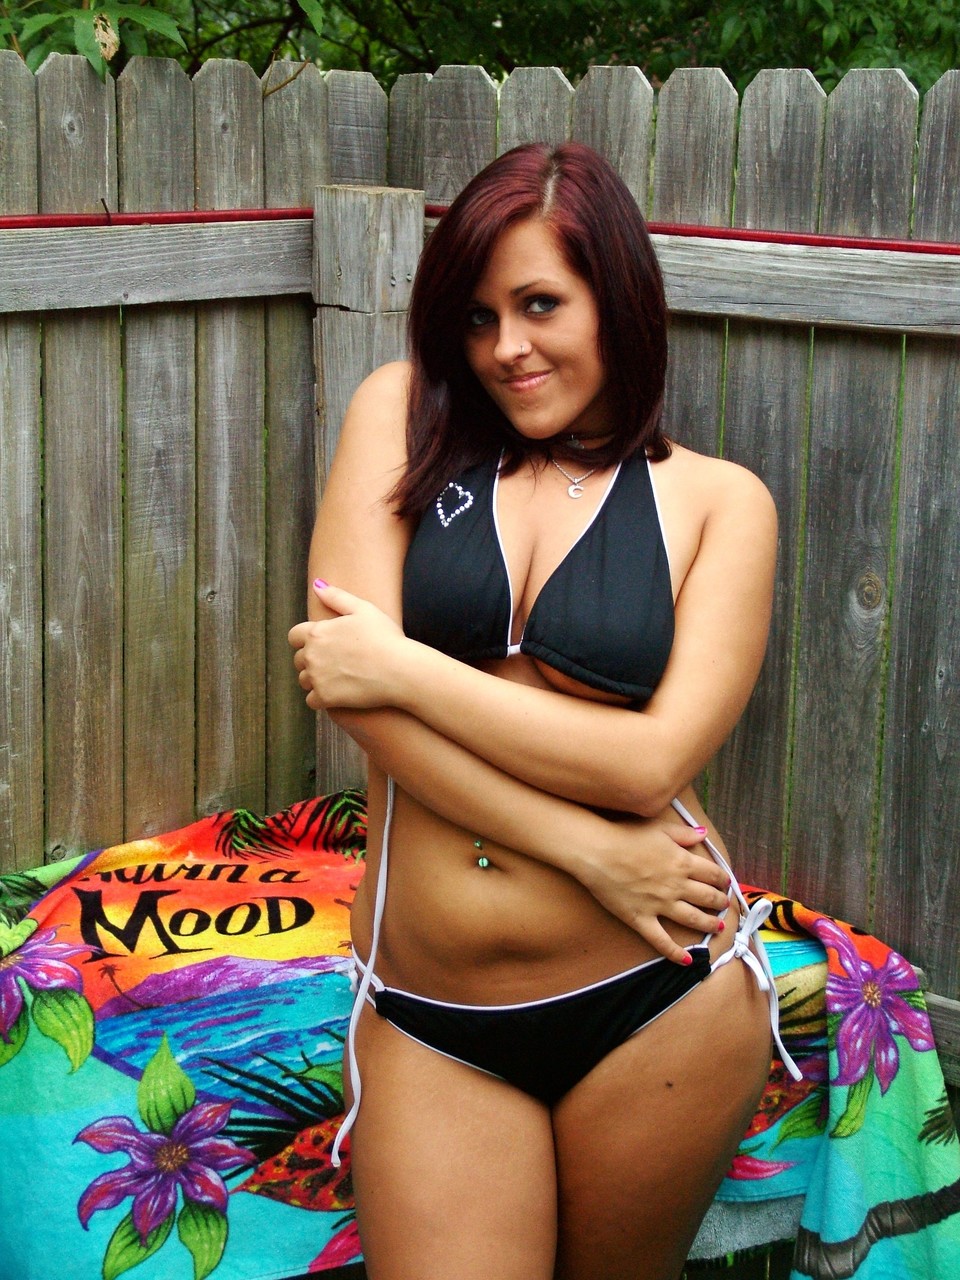 Chubby amateur teen Roxy displays her huge juggs and poses in the back yard photo porno #425617689 | Teen Girl Photos Pics, Amateur, porno mobile